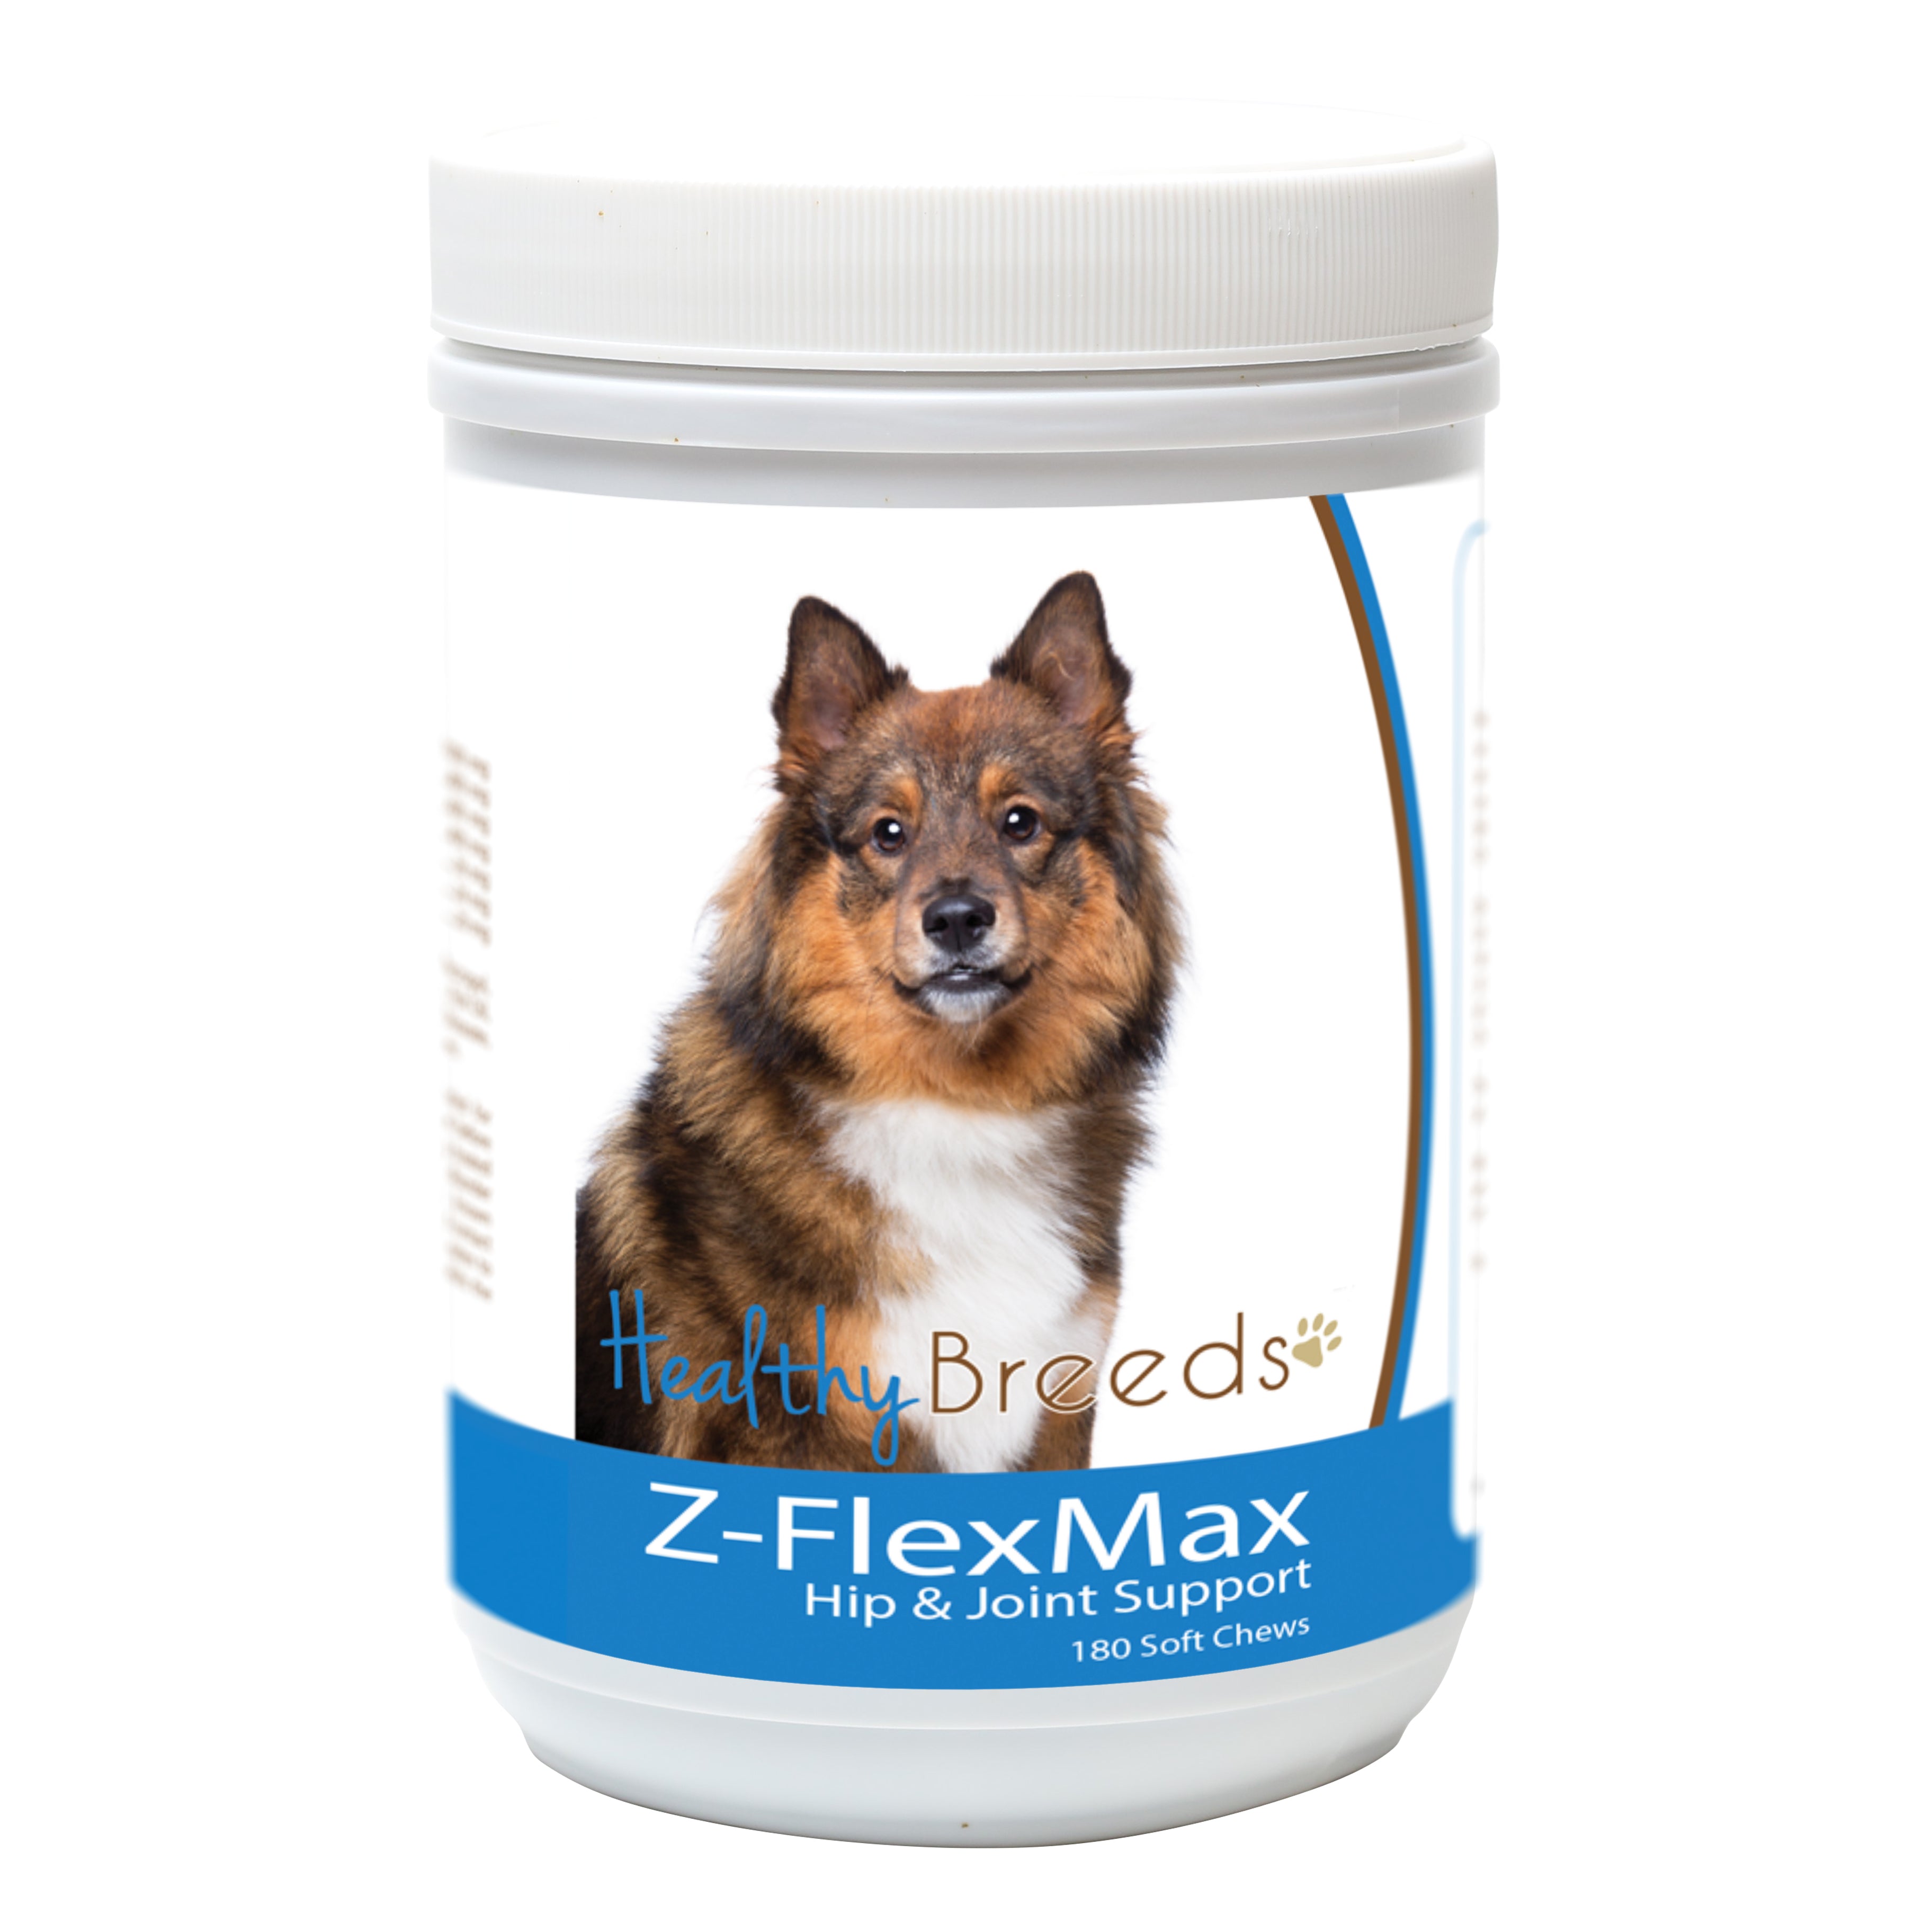 Eurasier Z-Flex Max Dog Hip and Joint Support 180 Count